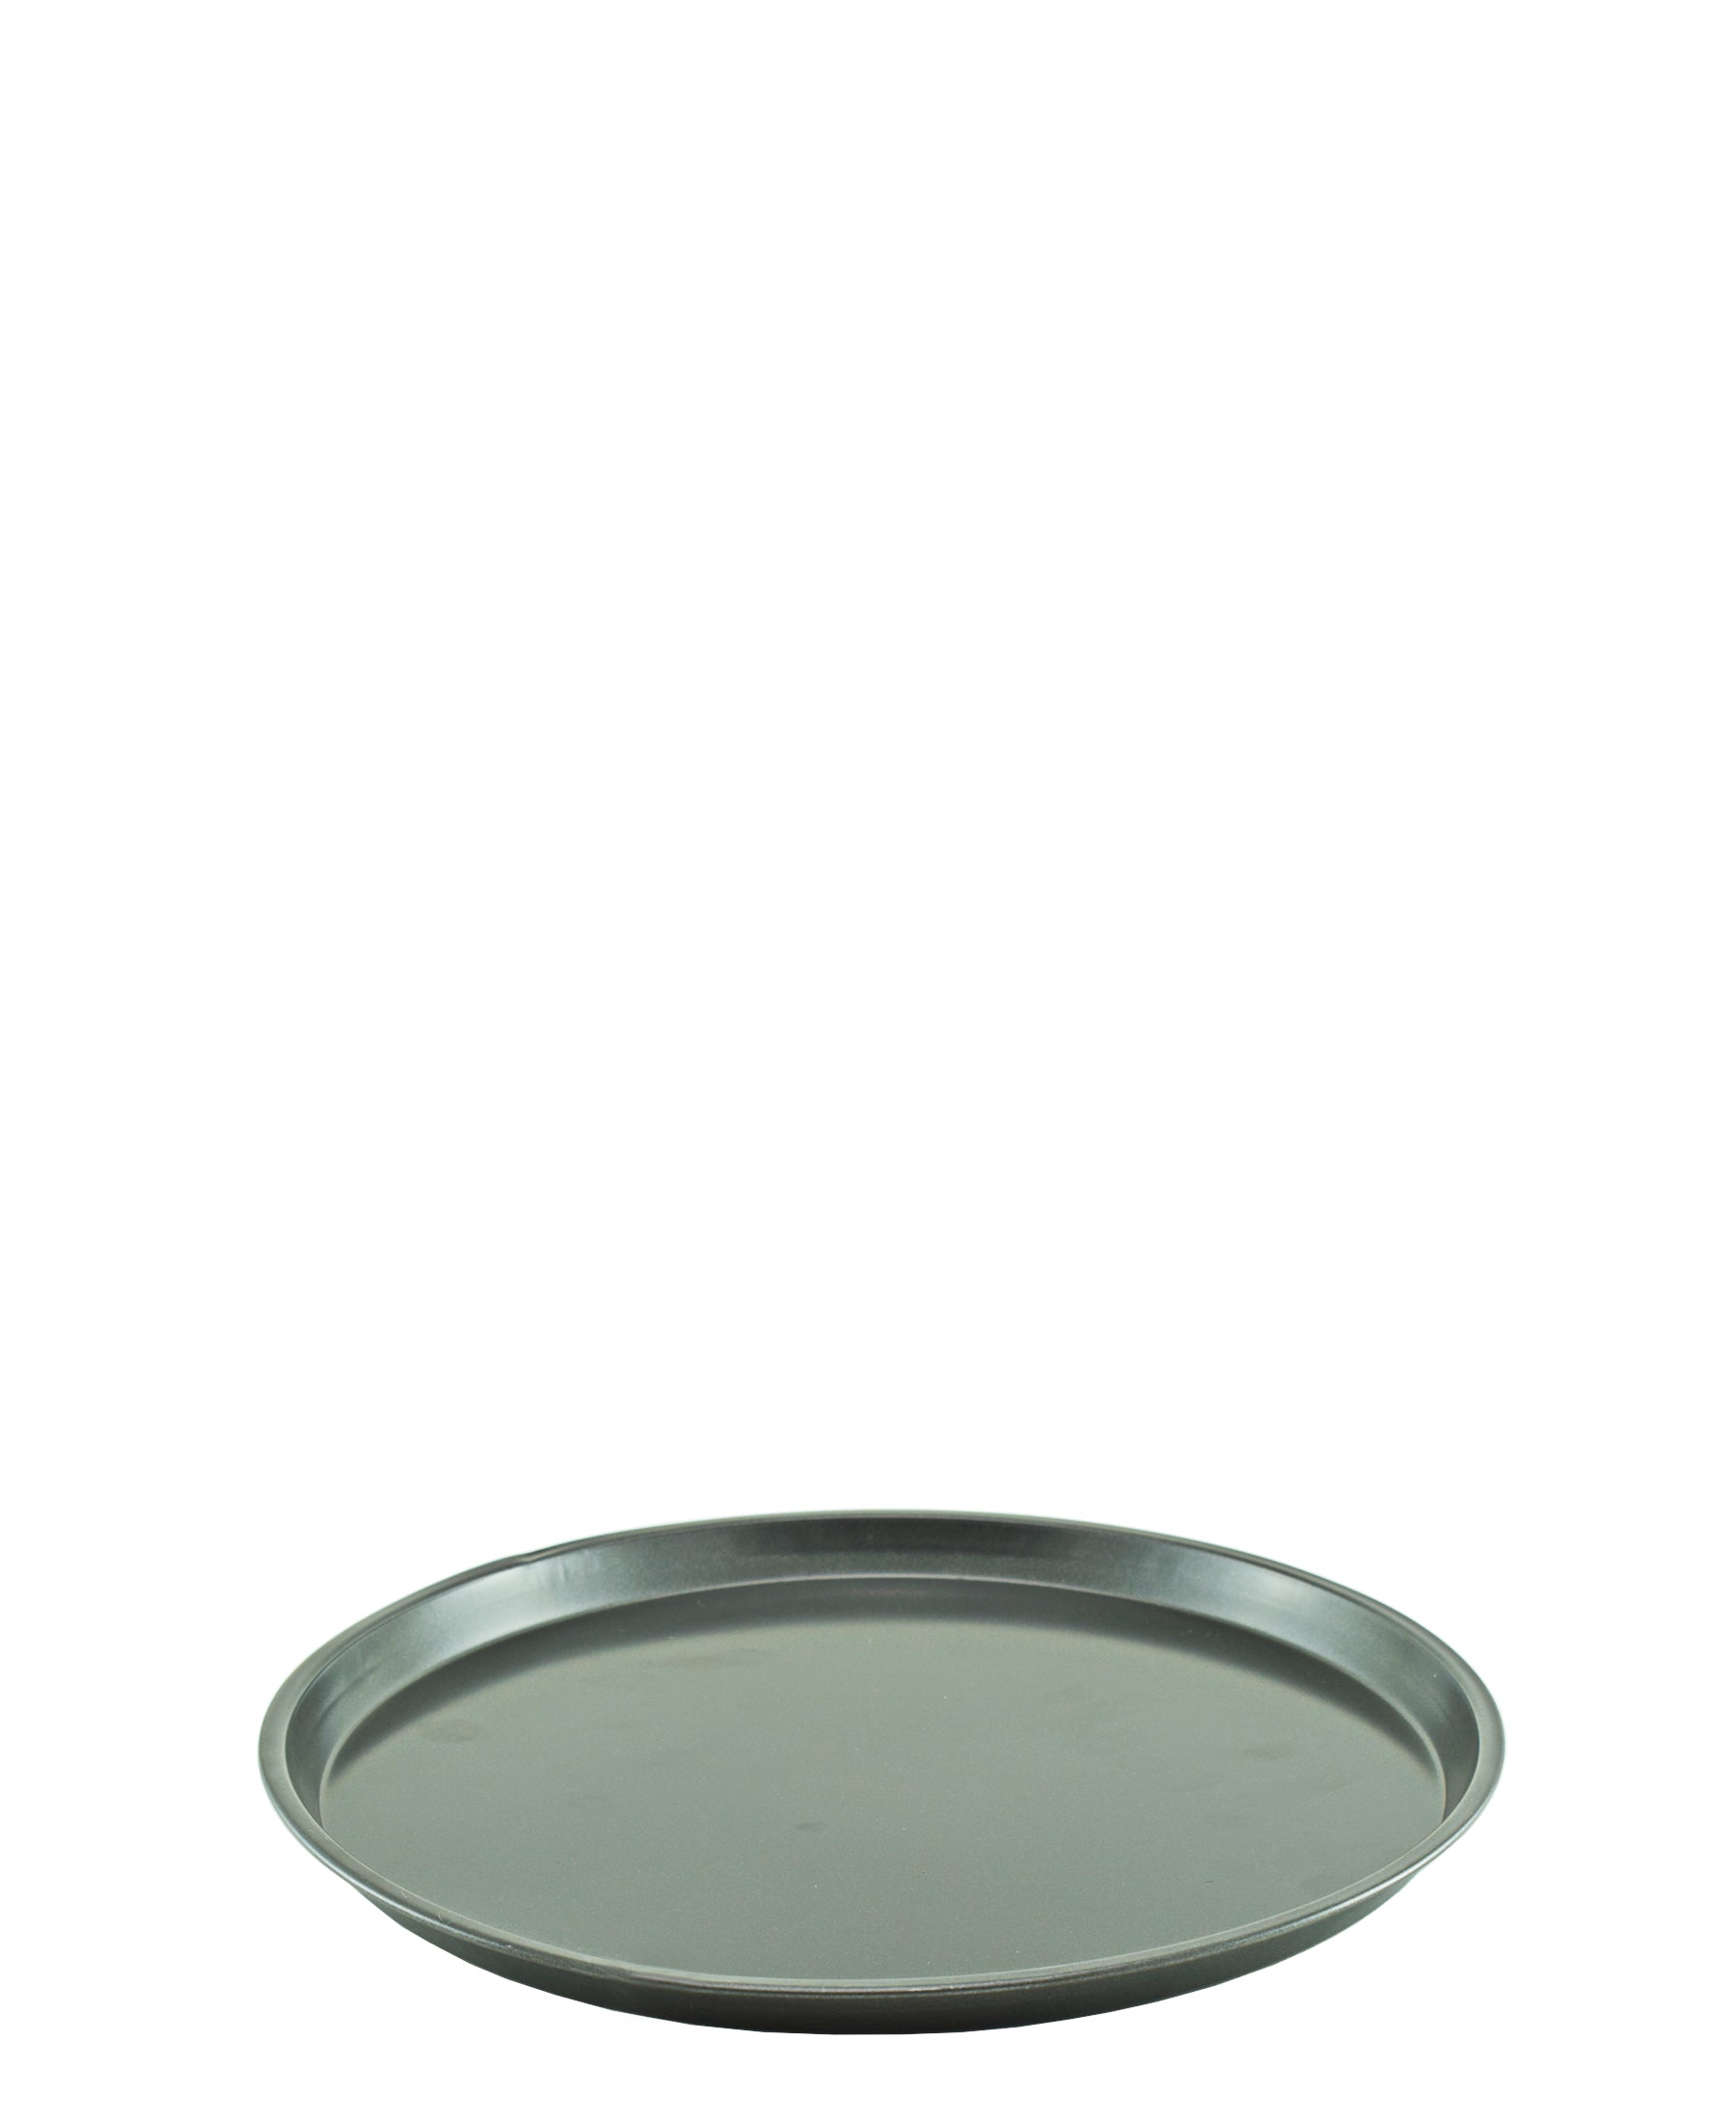 Kitchen Life Stainless Steel Round Baking Tray - Silver